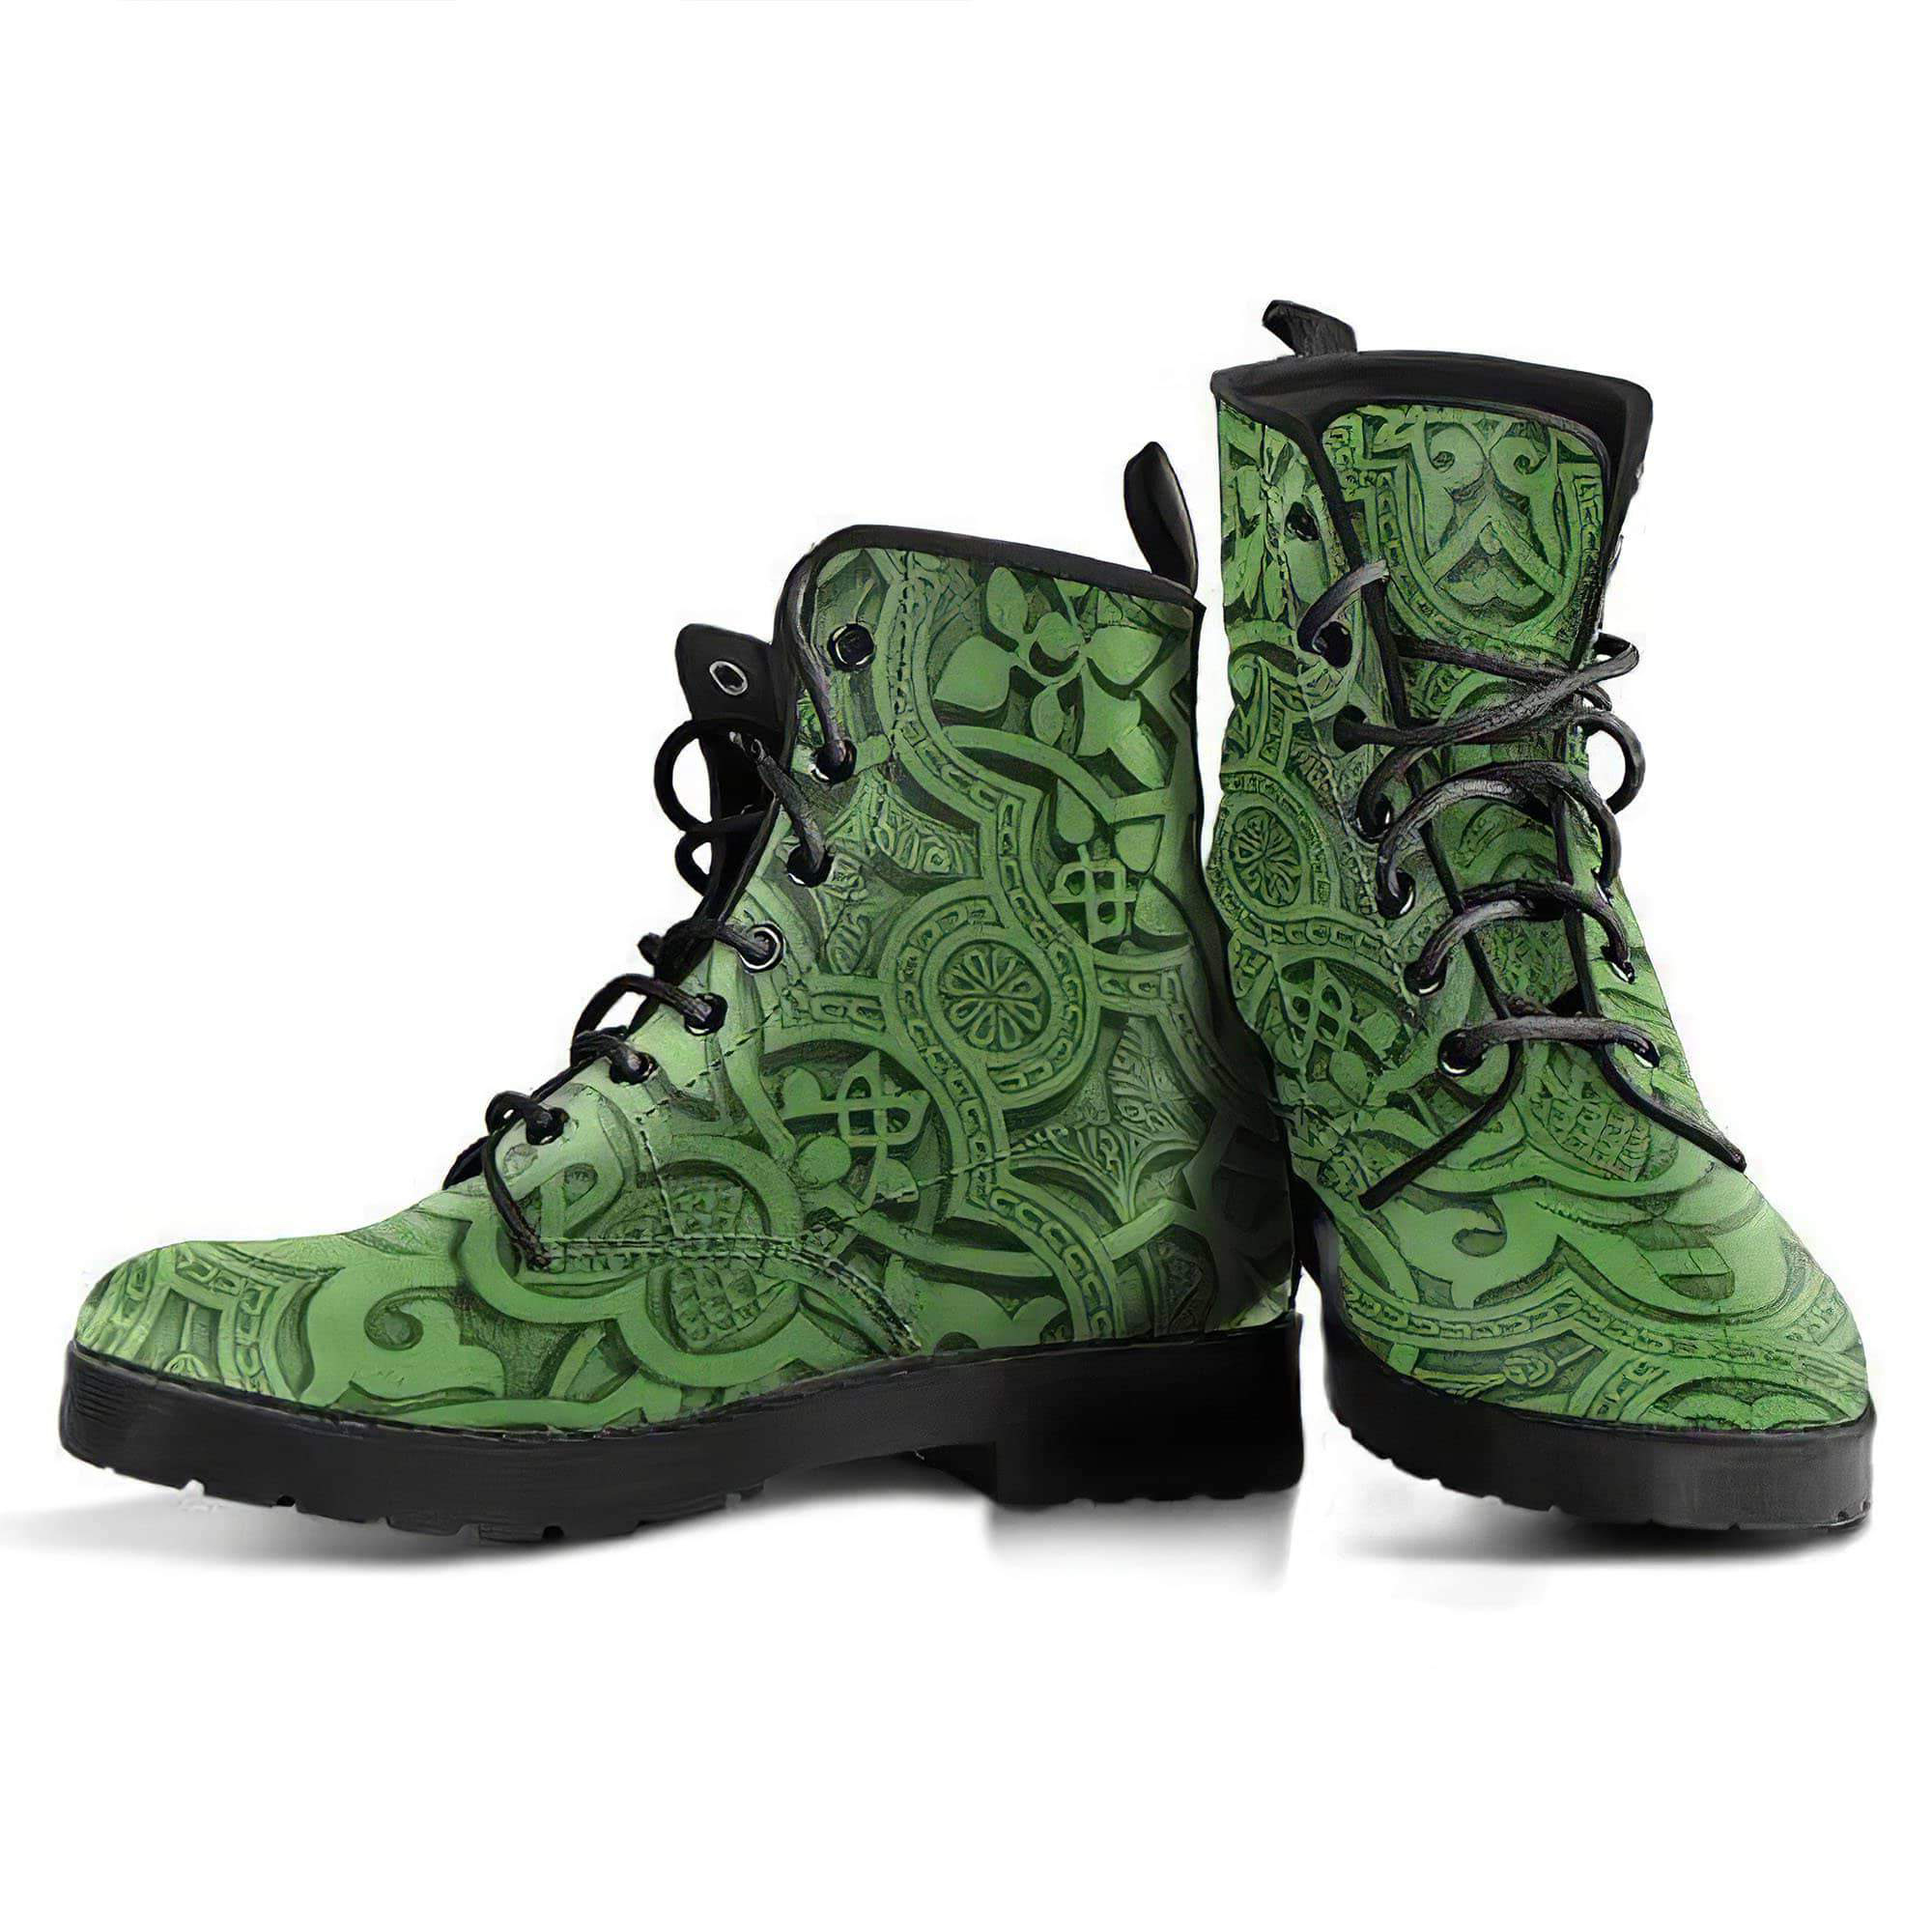 vintage-mandala-ceilings-in-hippie-green-leather-boots-for-women-women-s-leather-boots-12051971506237.jpg